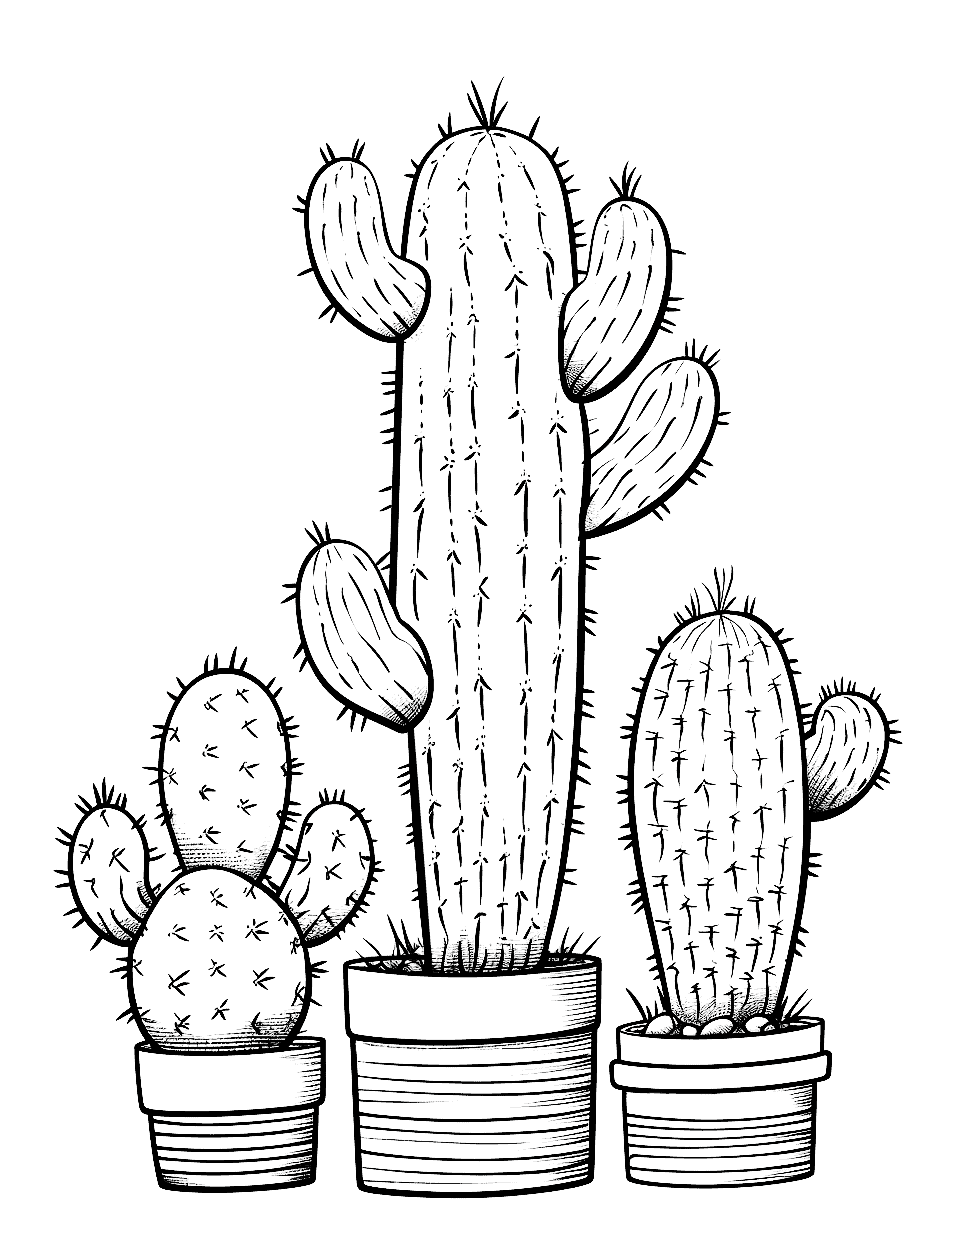 Cactus Family Coloring Page - A family of cacti of varying sizes.